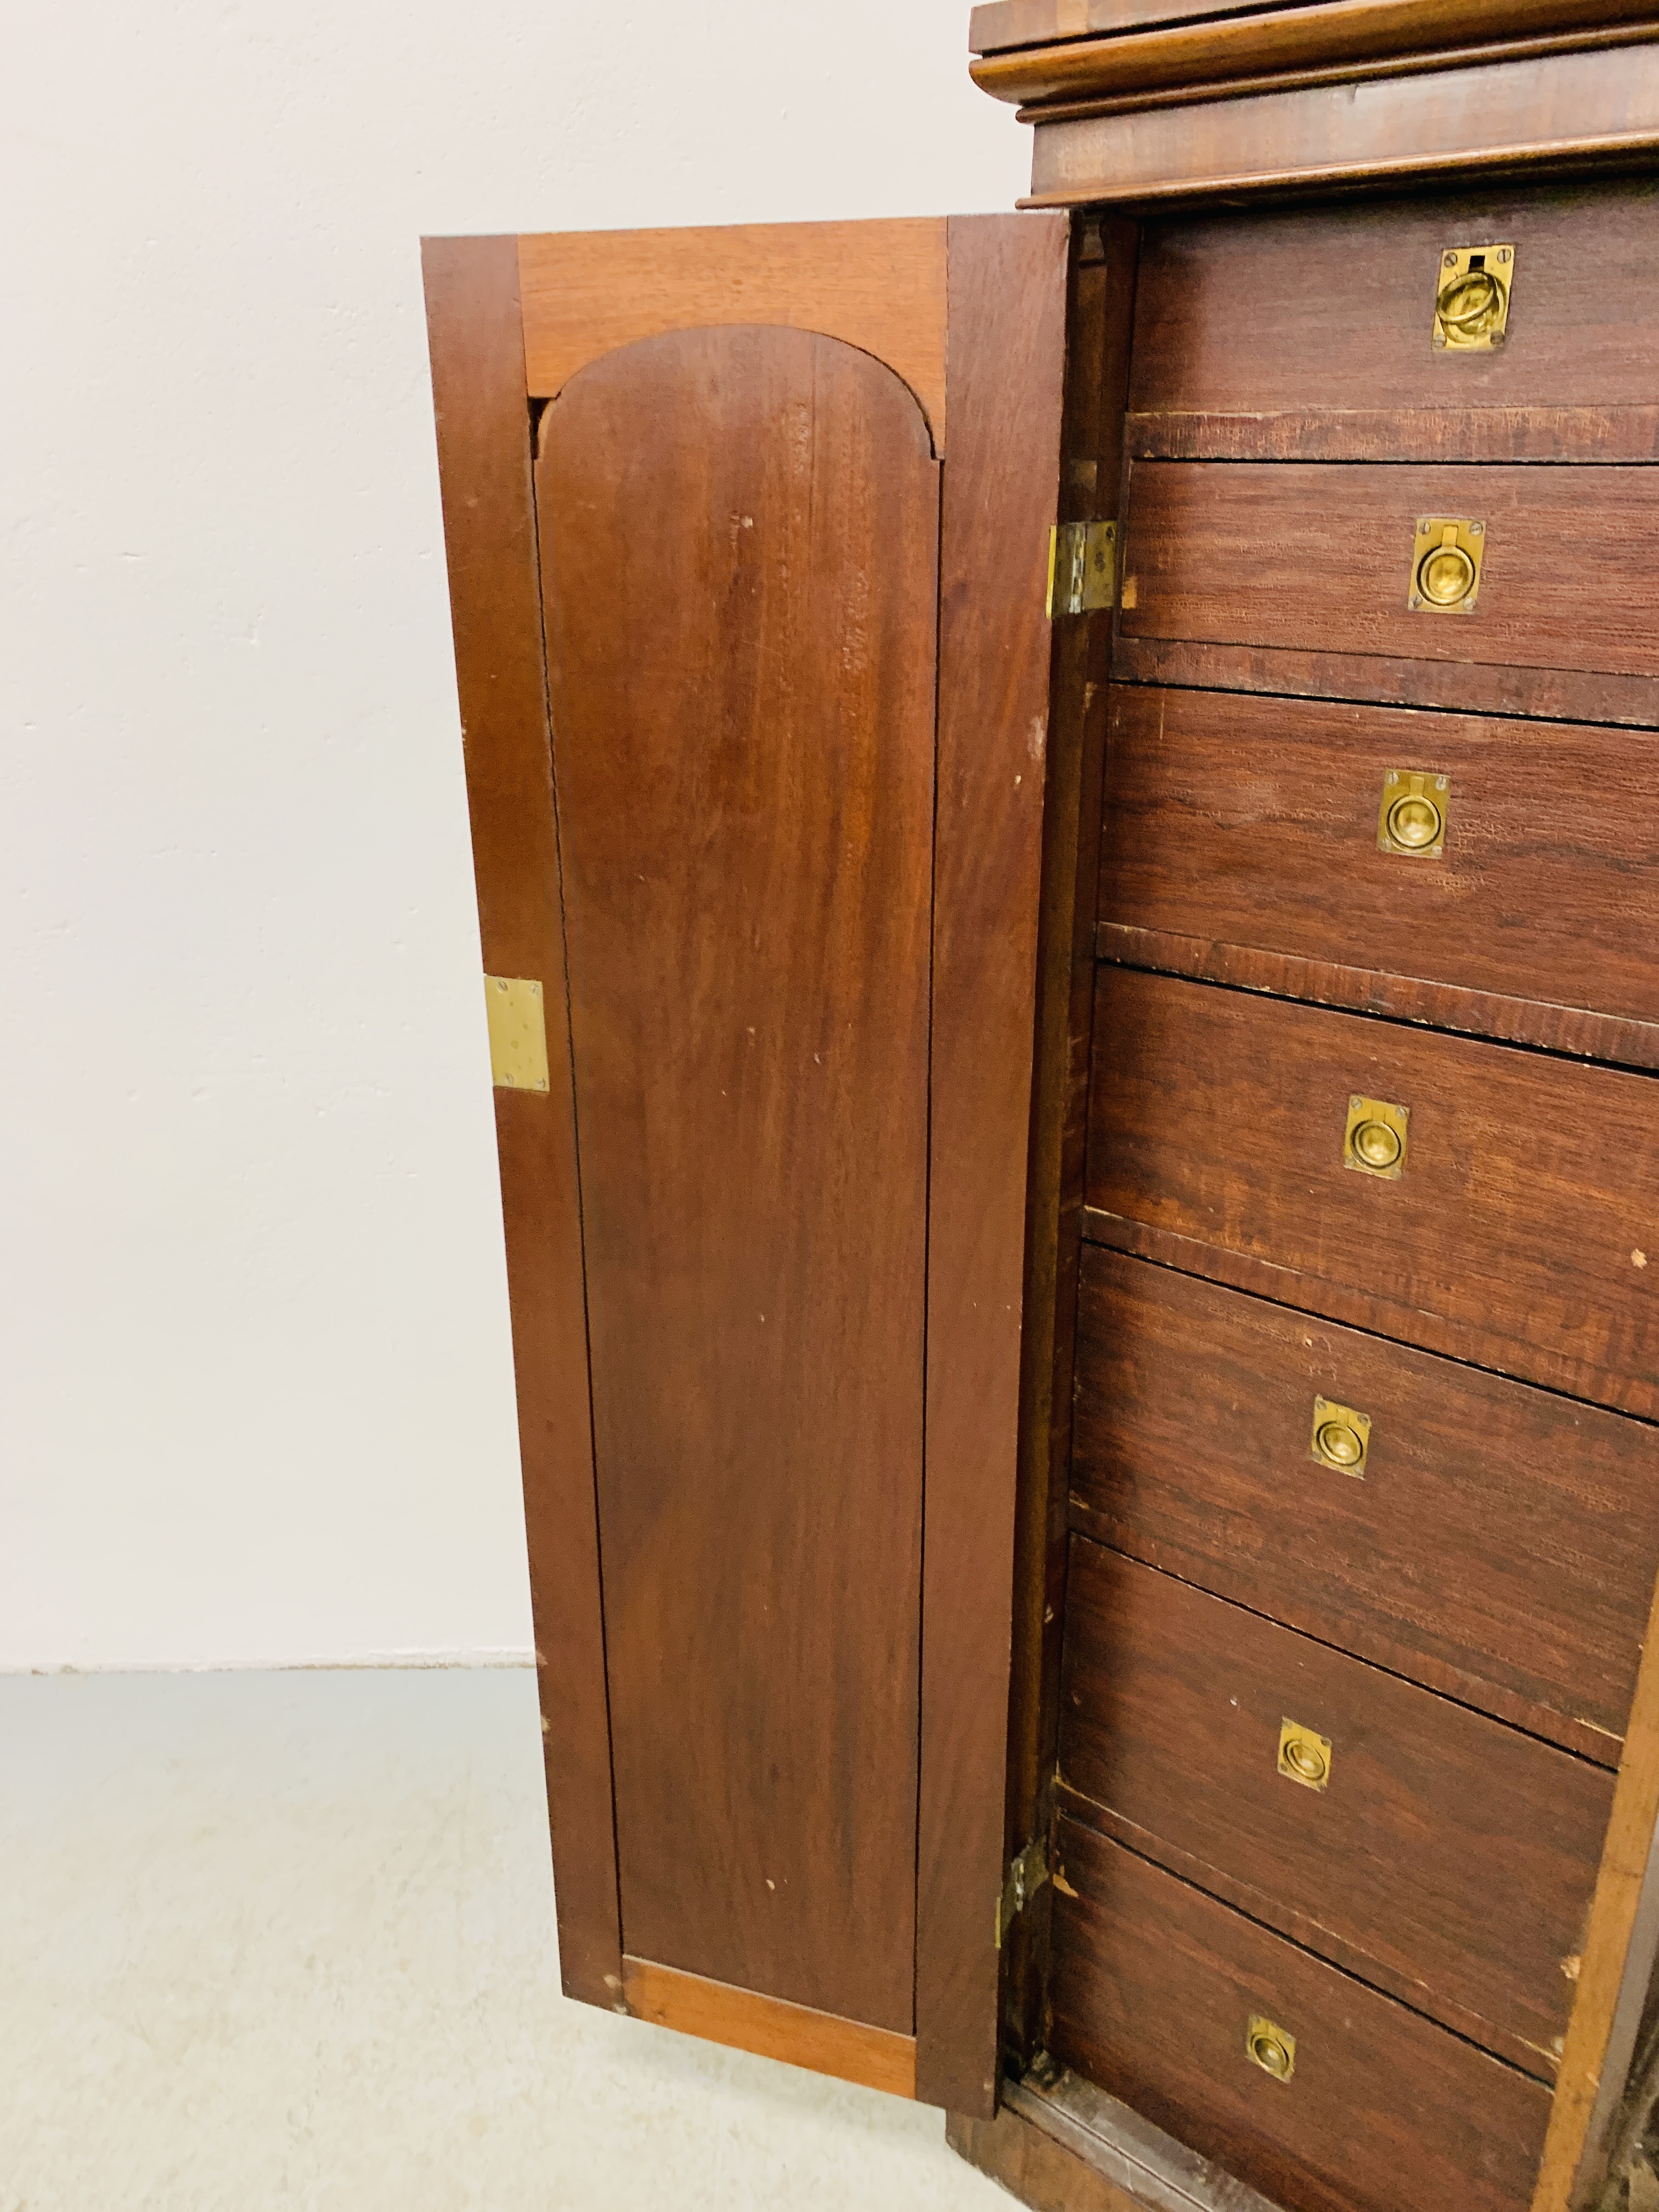 AN EARLY C19TH MAHOGANY SINGLE DOOR PEDESTAL (PART OF A LARGER PIECE) ENCLOSING SEVEN DRAWERS - Image 17 of 17